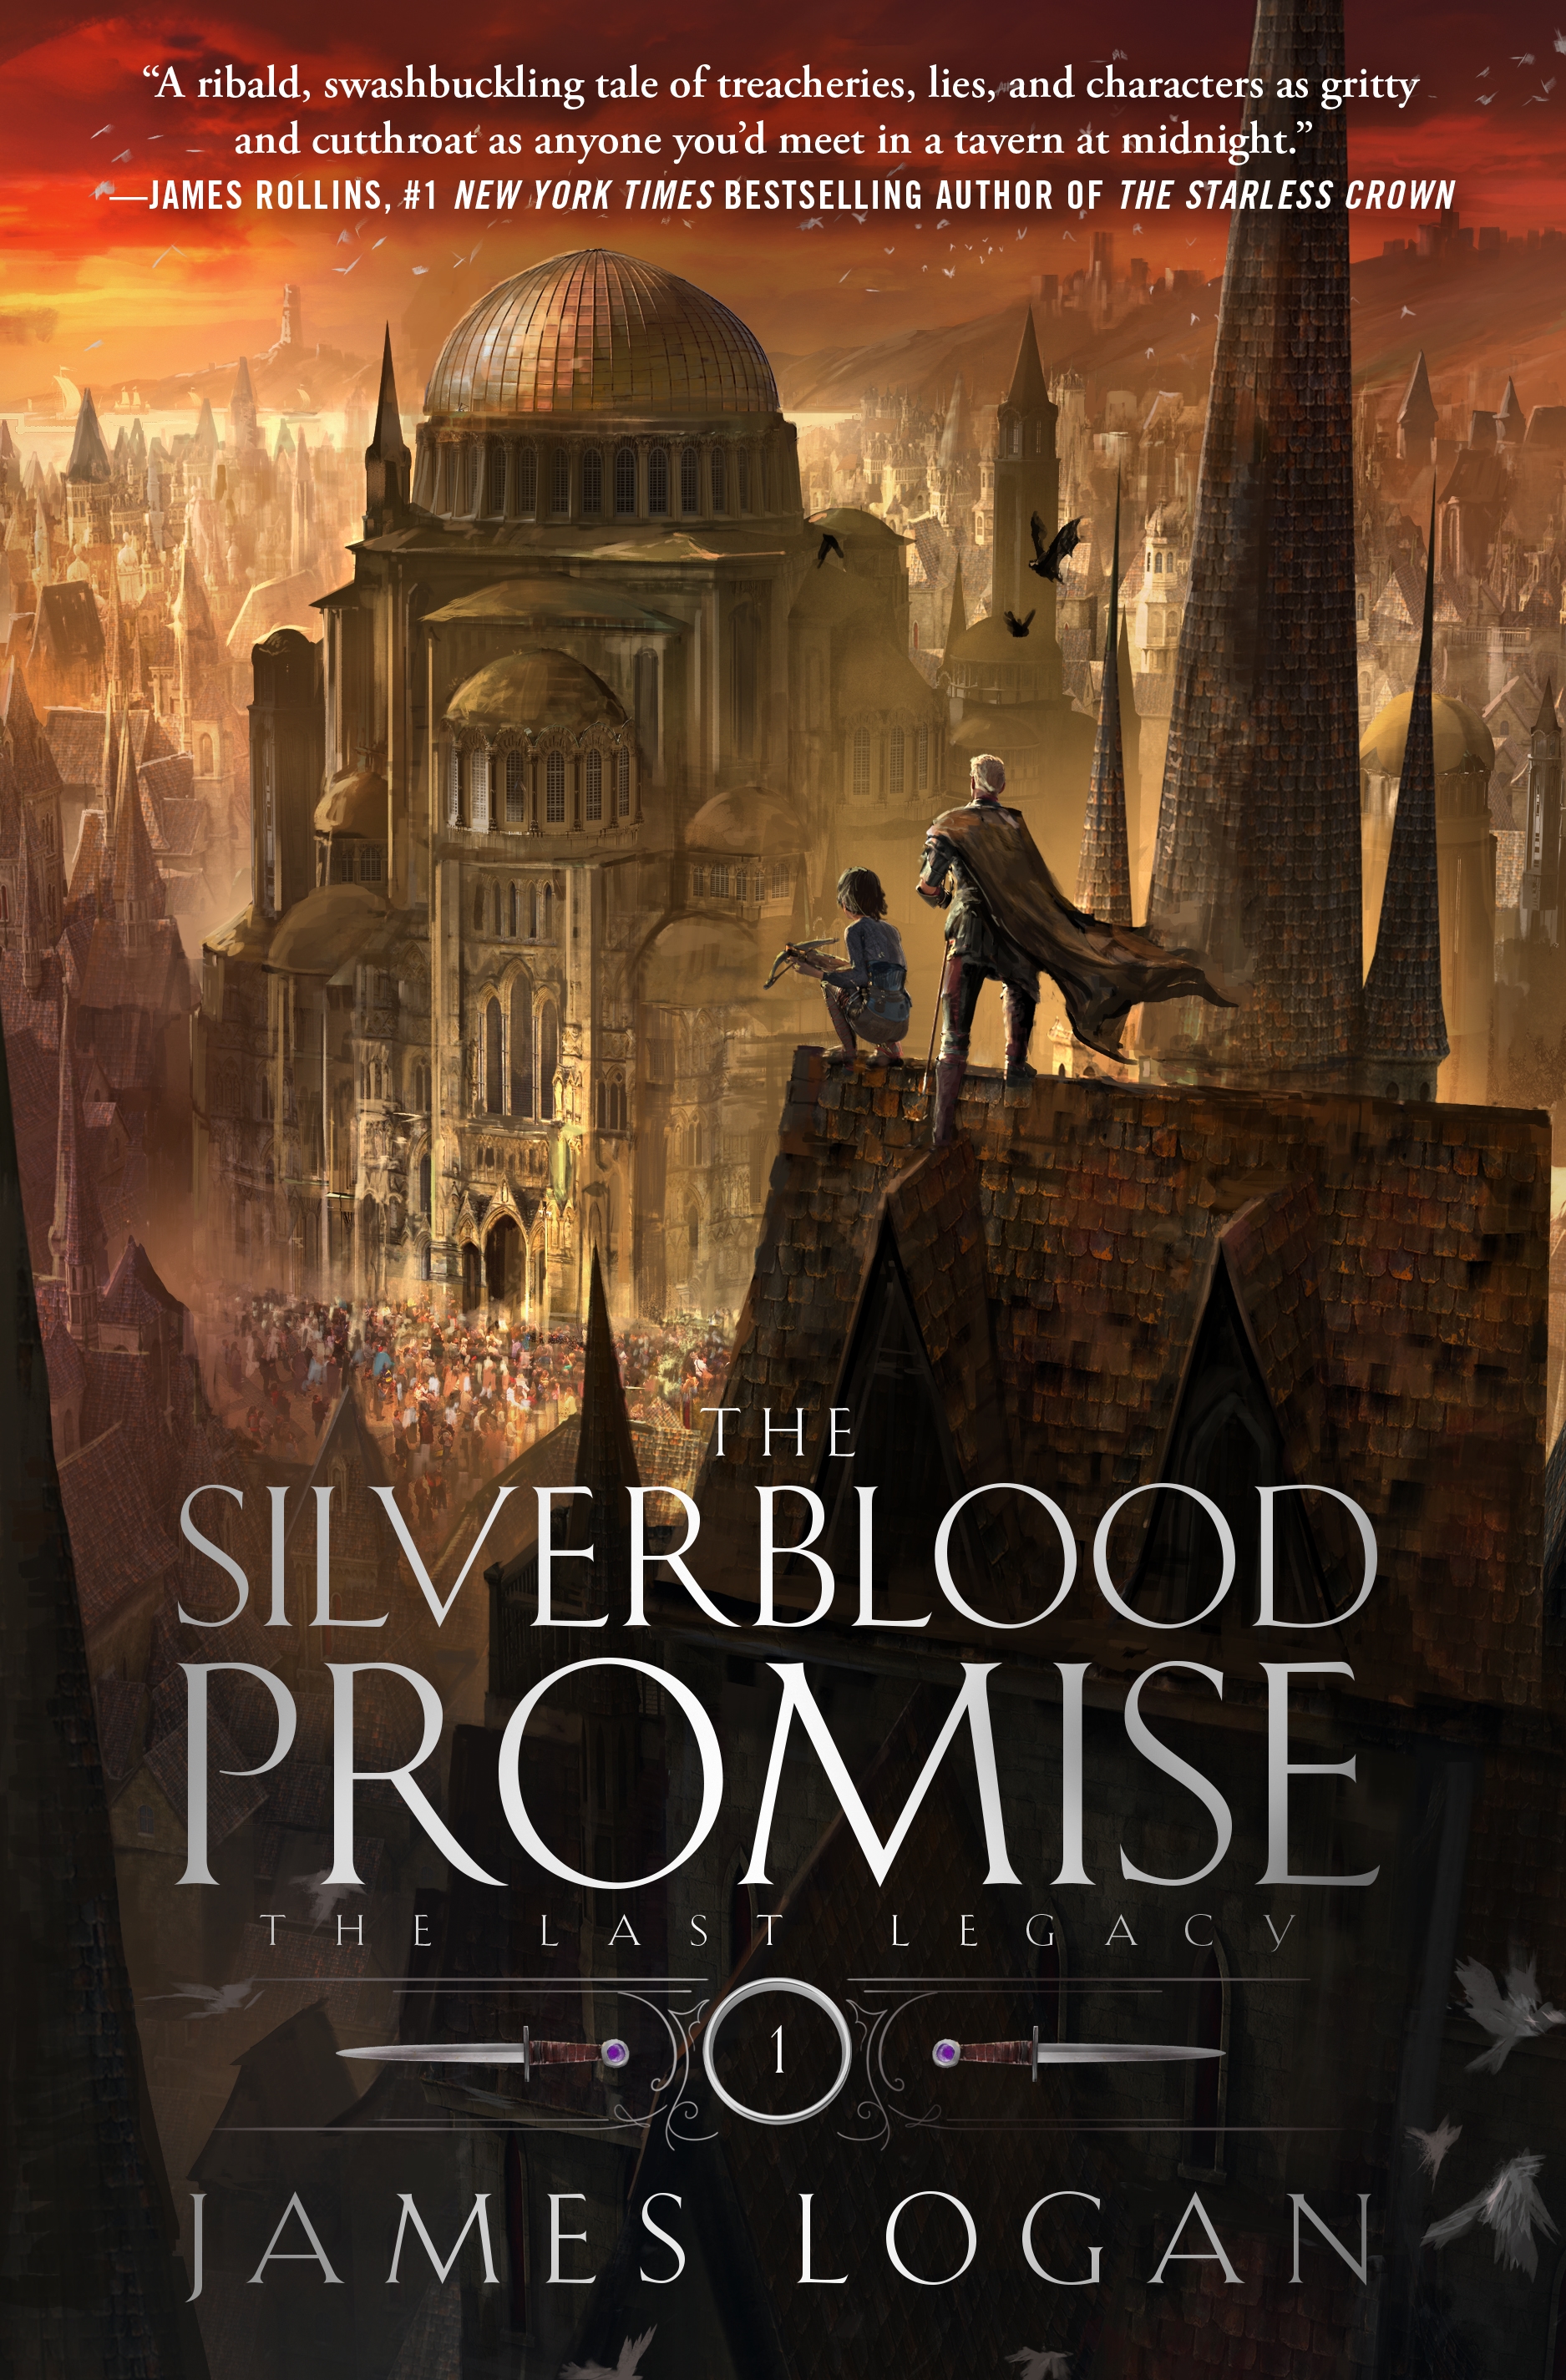 The Silverblood Promise : The Last Legacy, Book 1 by James Logan